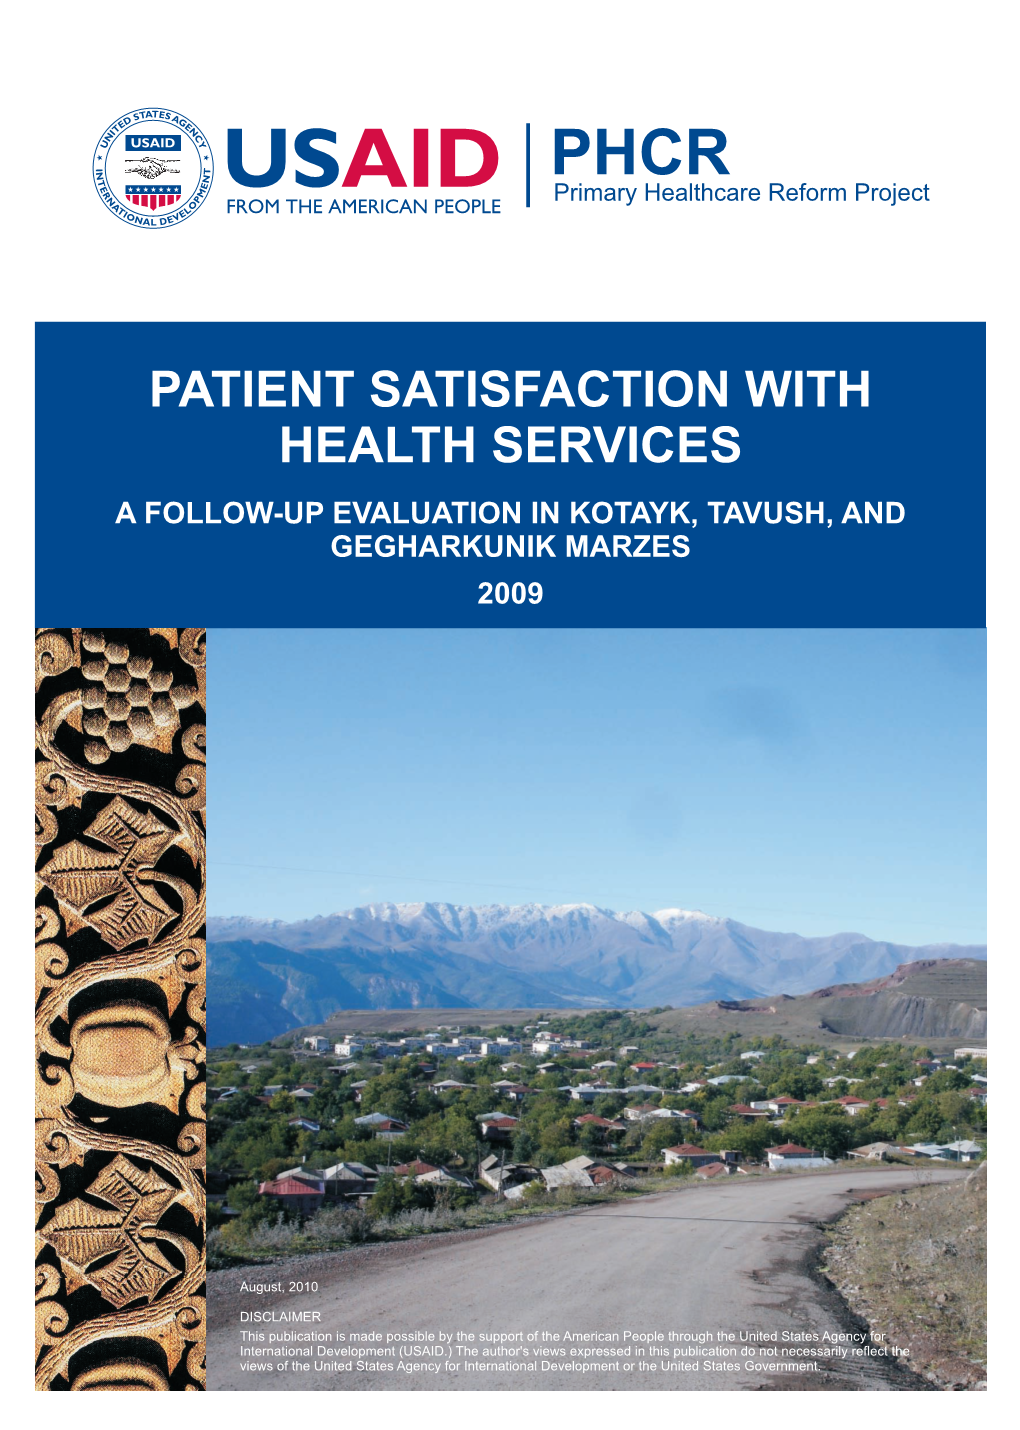 Patient Satisfaction with Health Services a Follow-Up Evaluation in Kotayk, Tavush, and Gegharkunik Marzes 2009